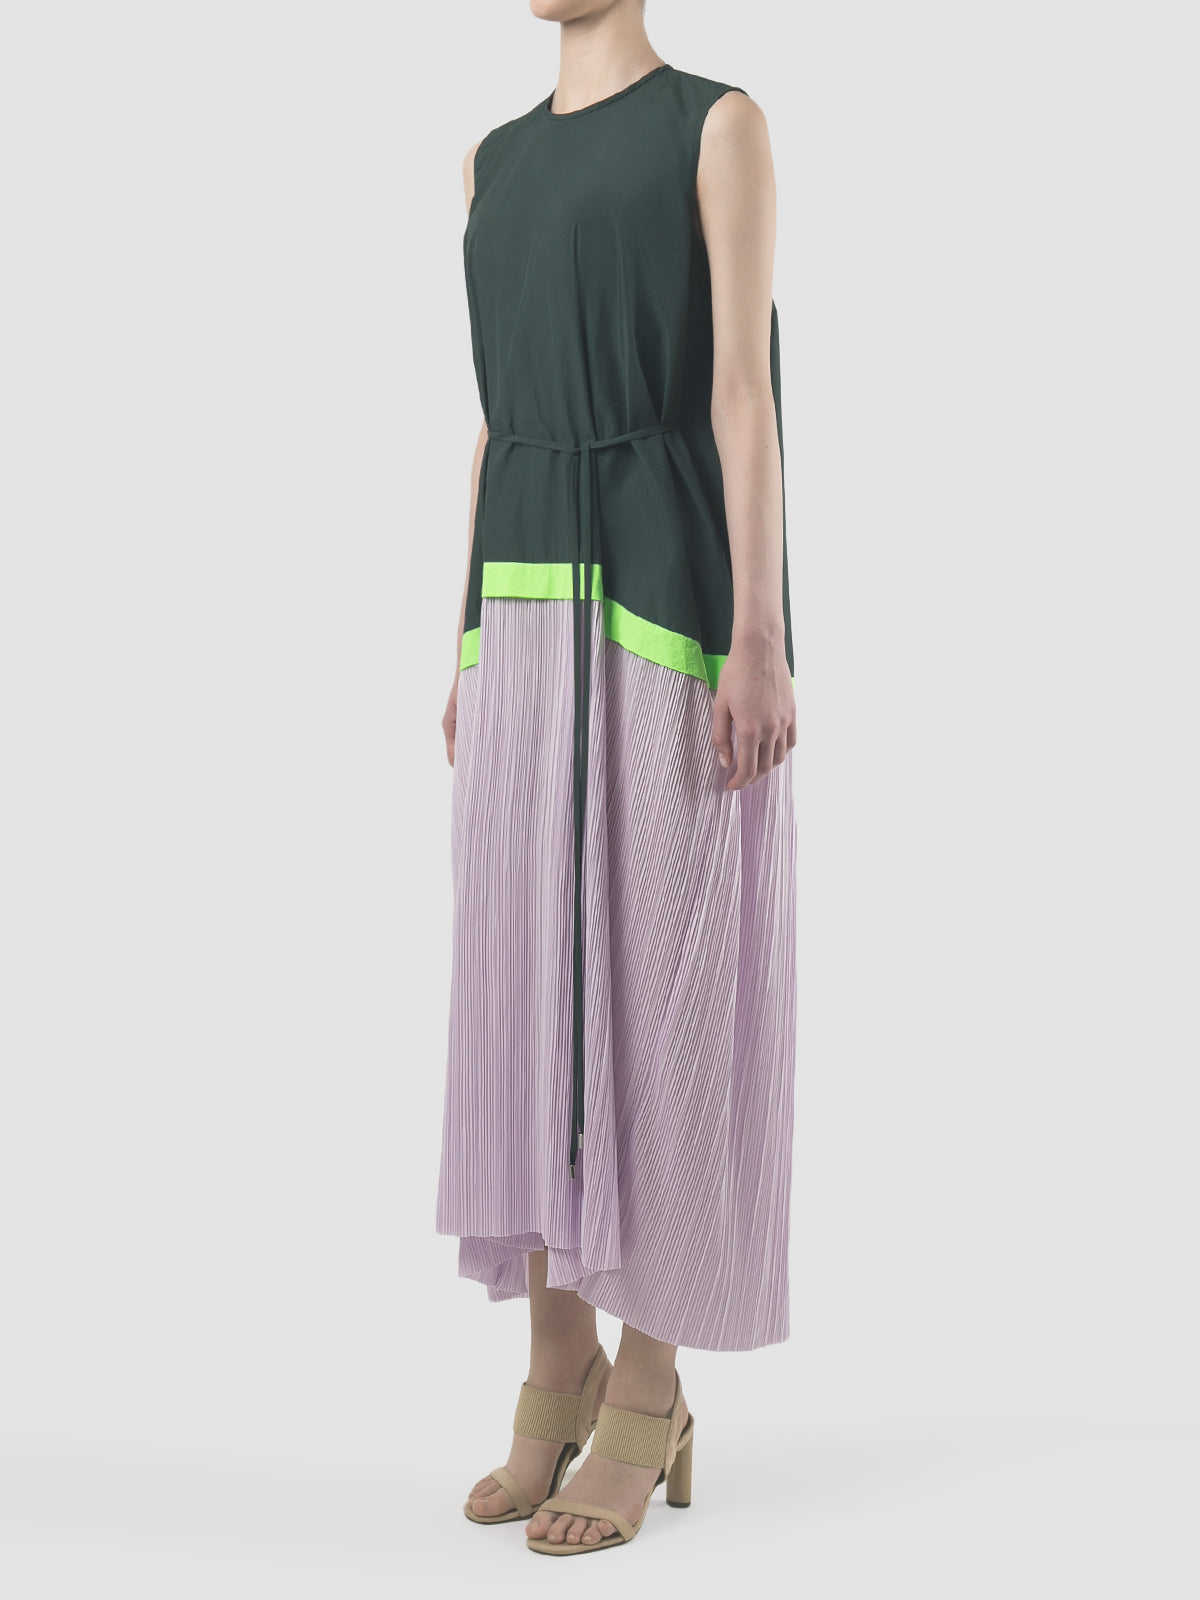 Composer forest green and lilac midi dress